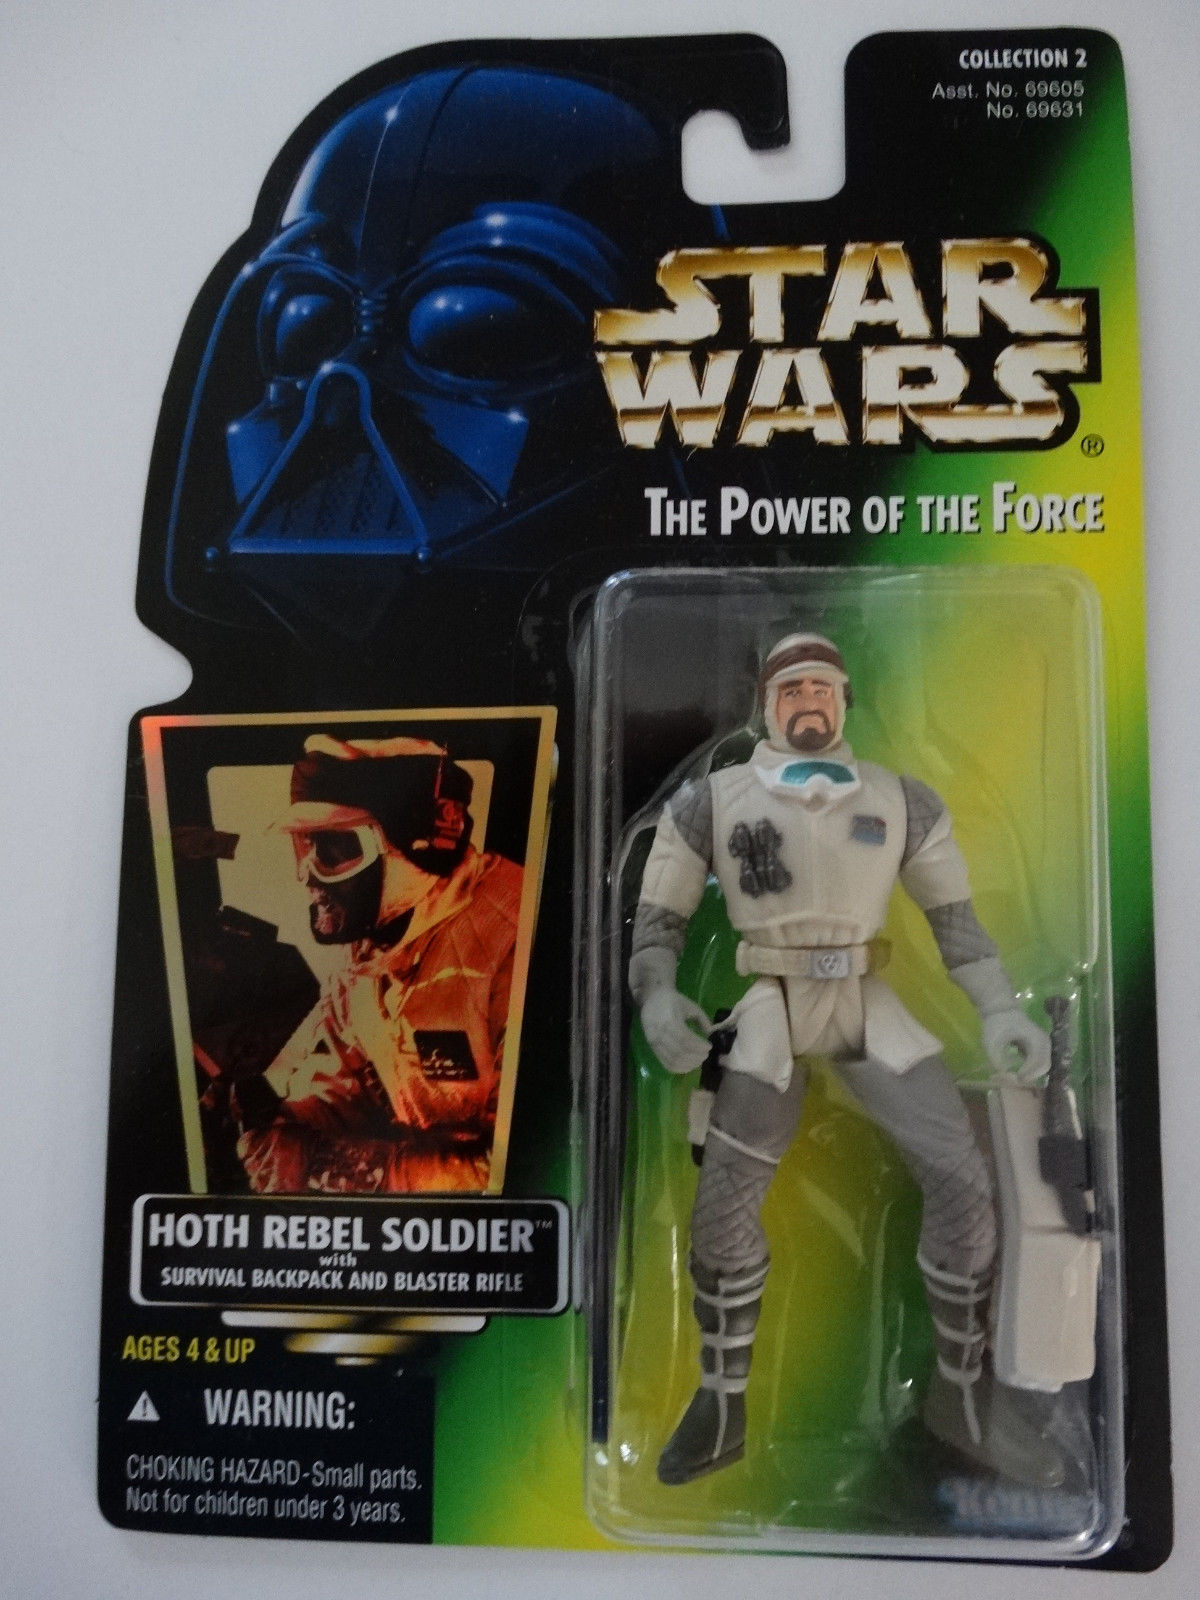 1996 Star Wars POTF Hoth Rebel Soldier with Backpack Blaster Rifle Action Figure - $15.00